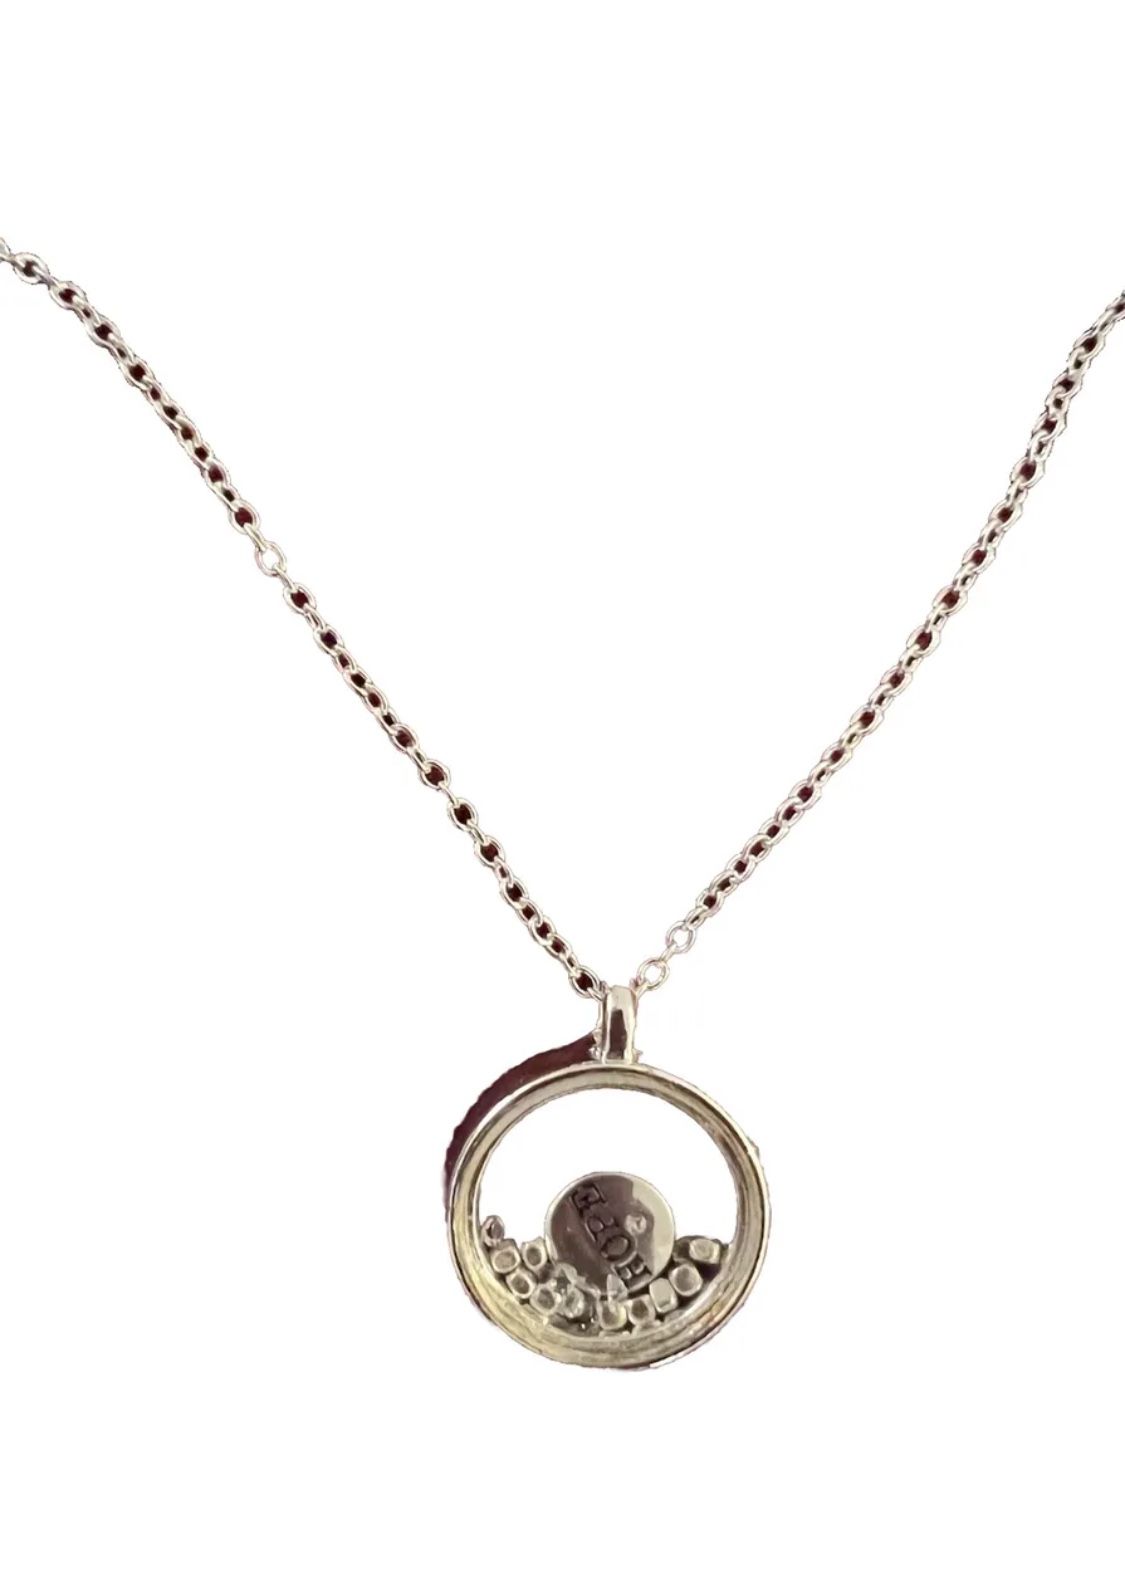 AVON “Many Blessings” quote Necklace with floating HOPE charm and tiny rhinestones.